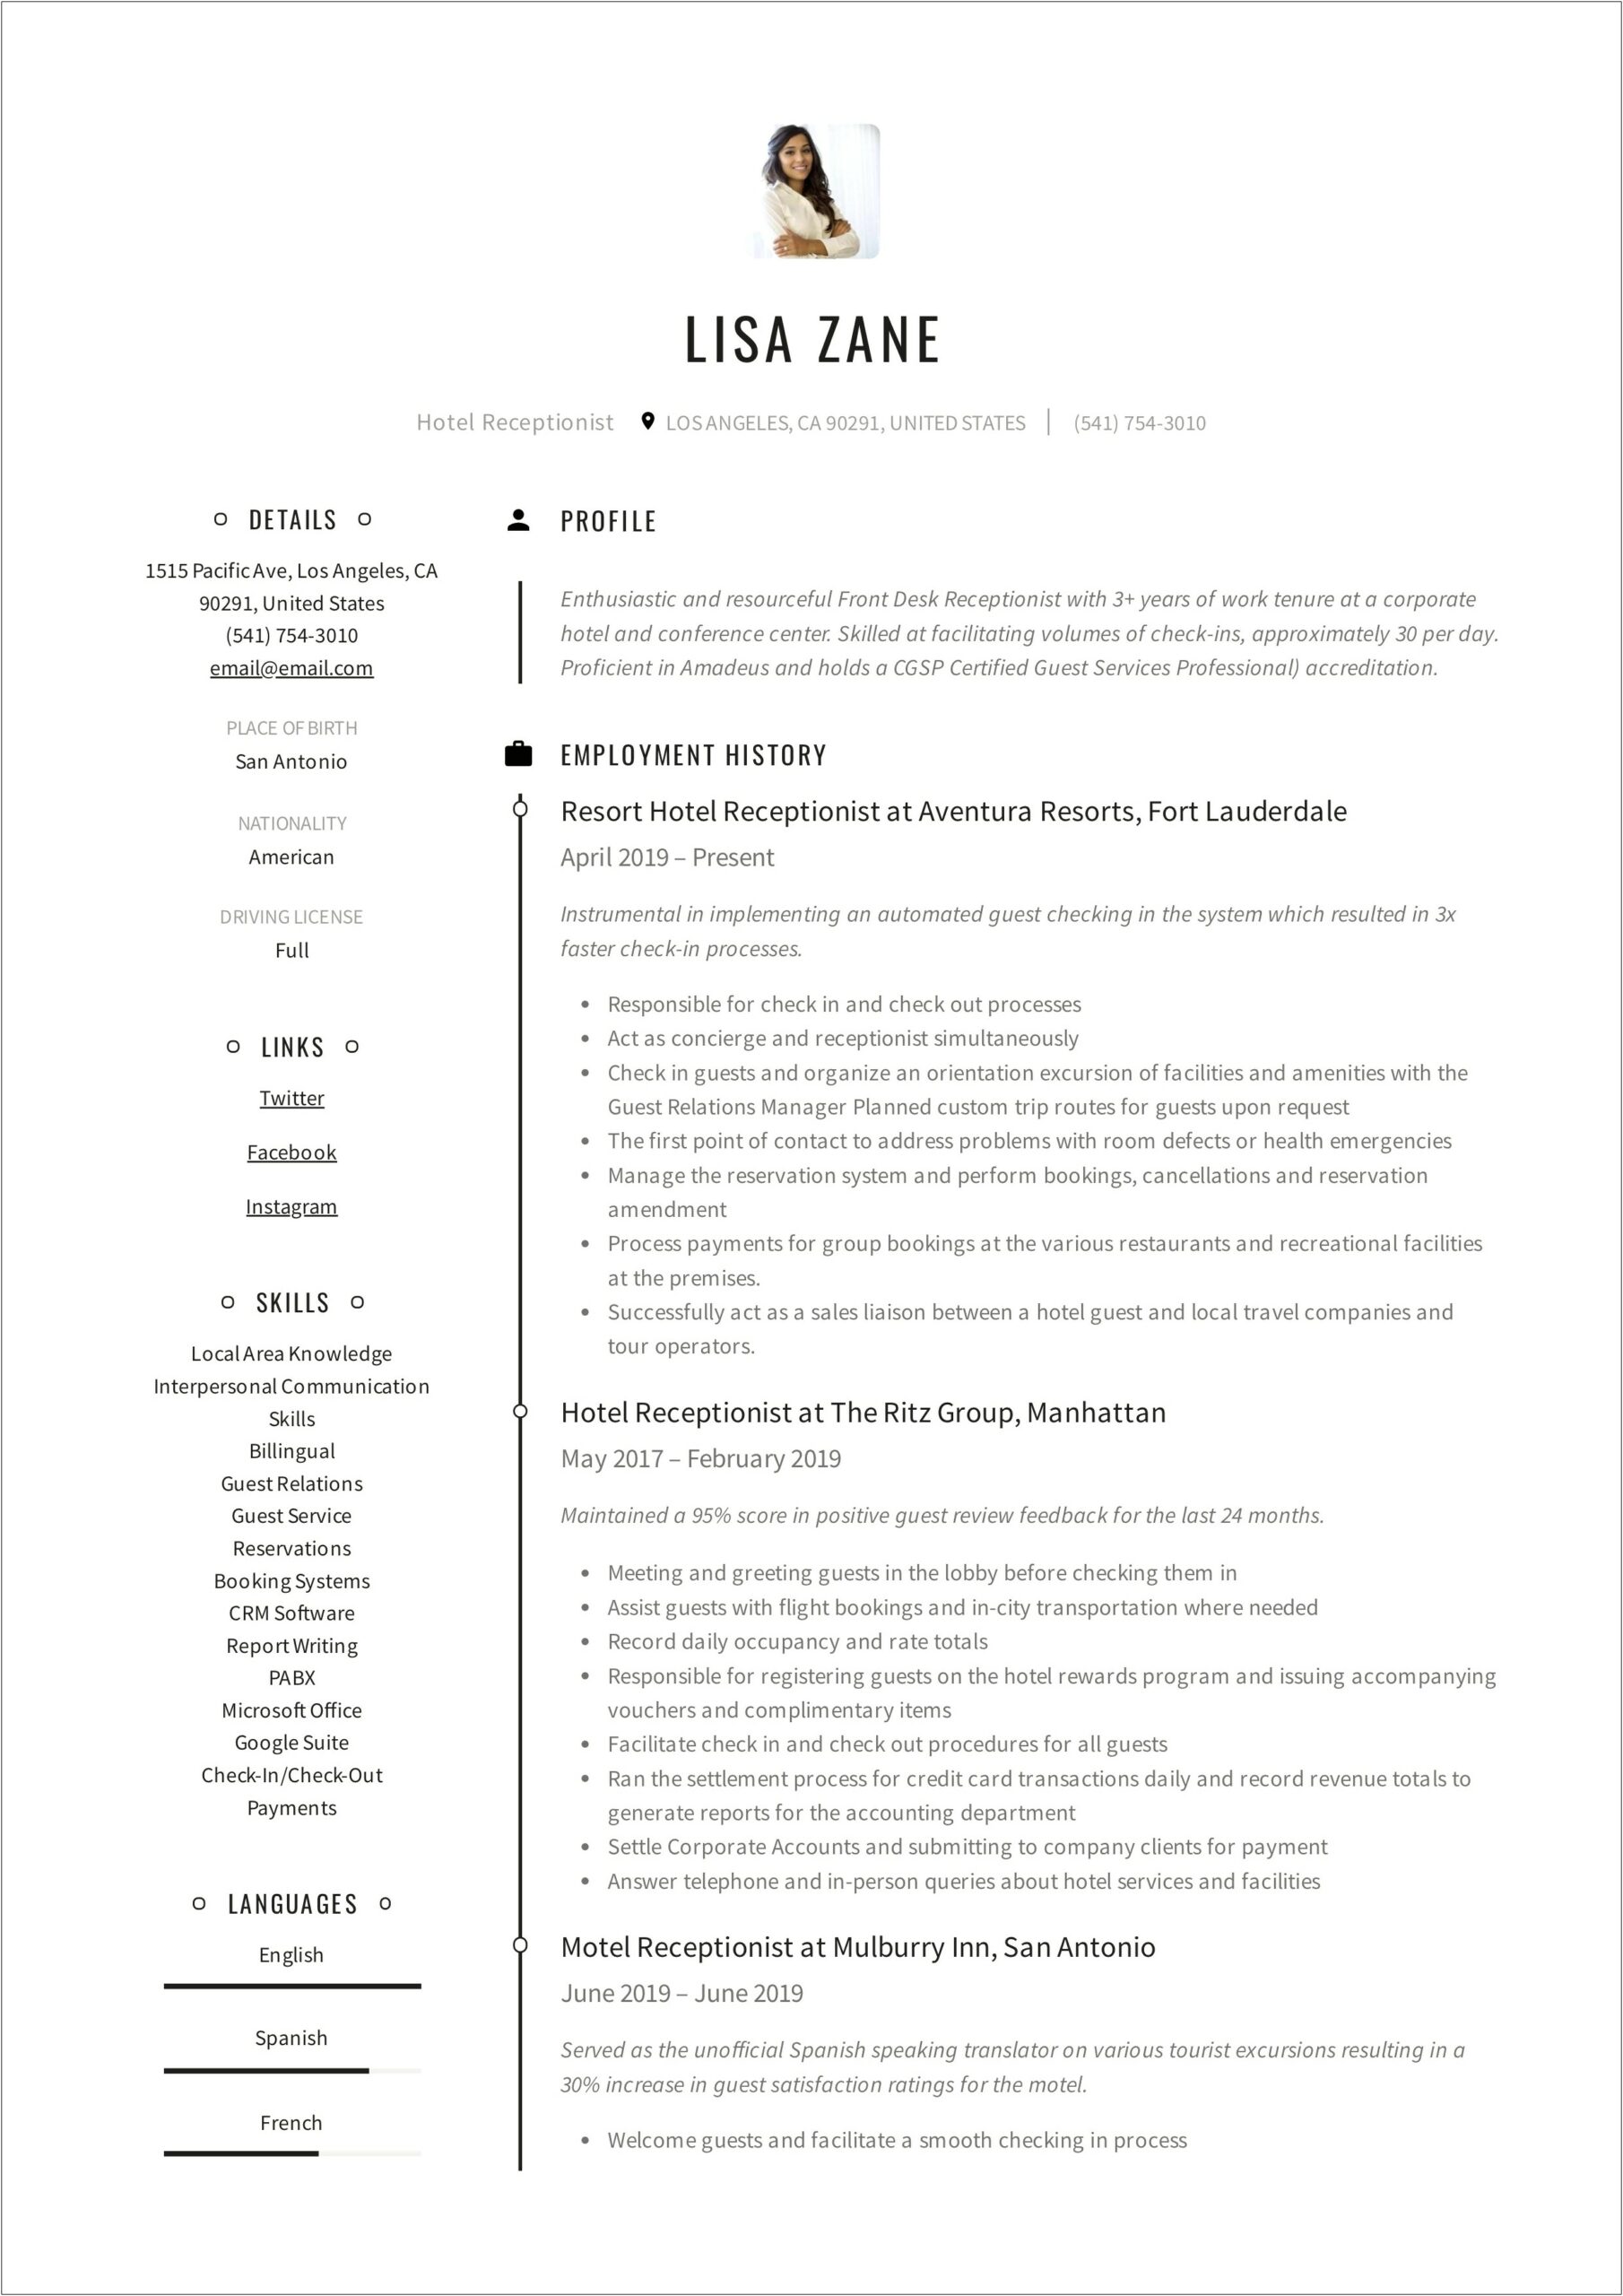 Resume To Get A Job As School Reception